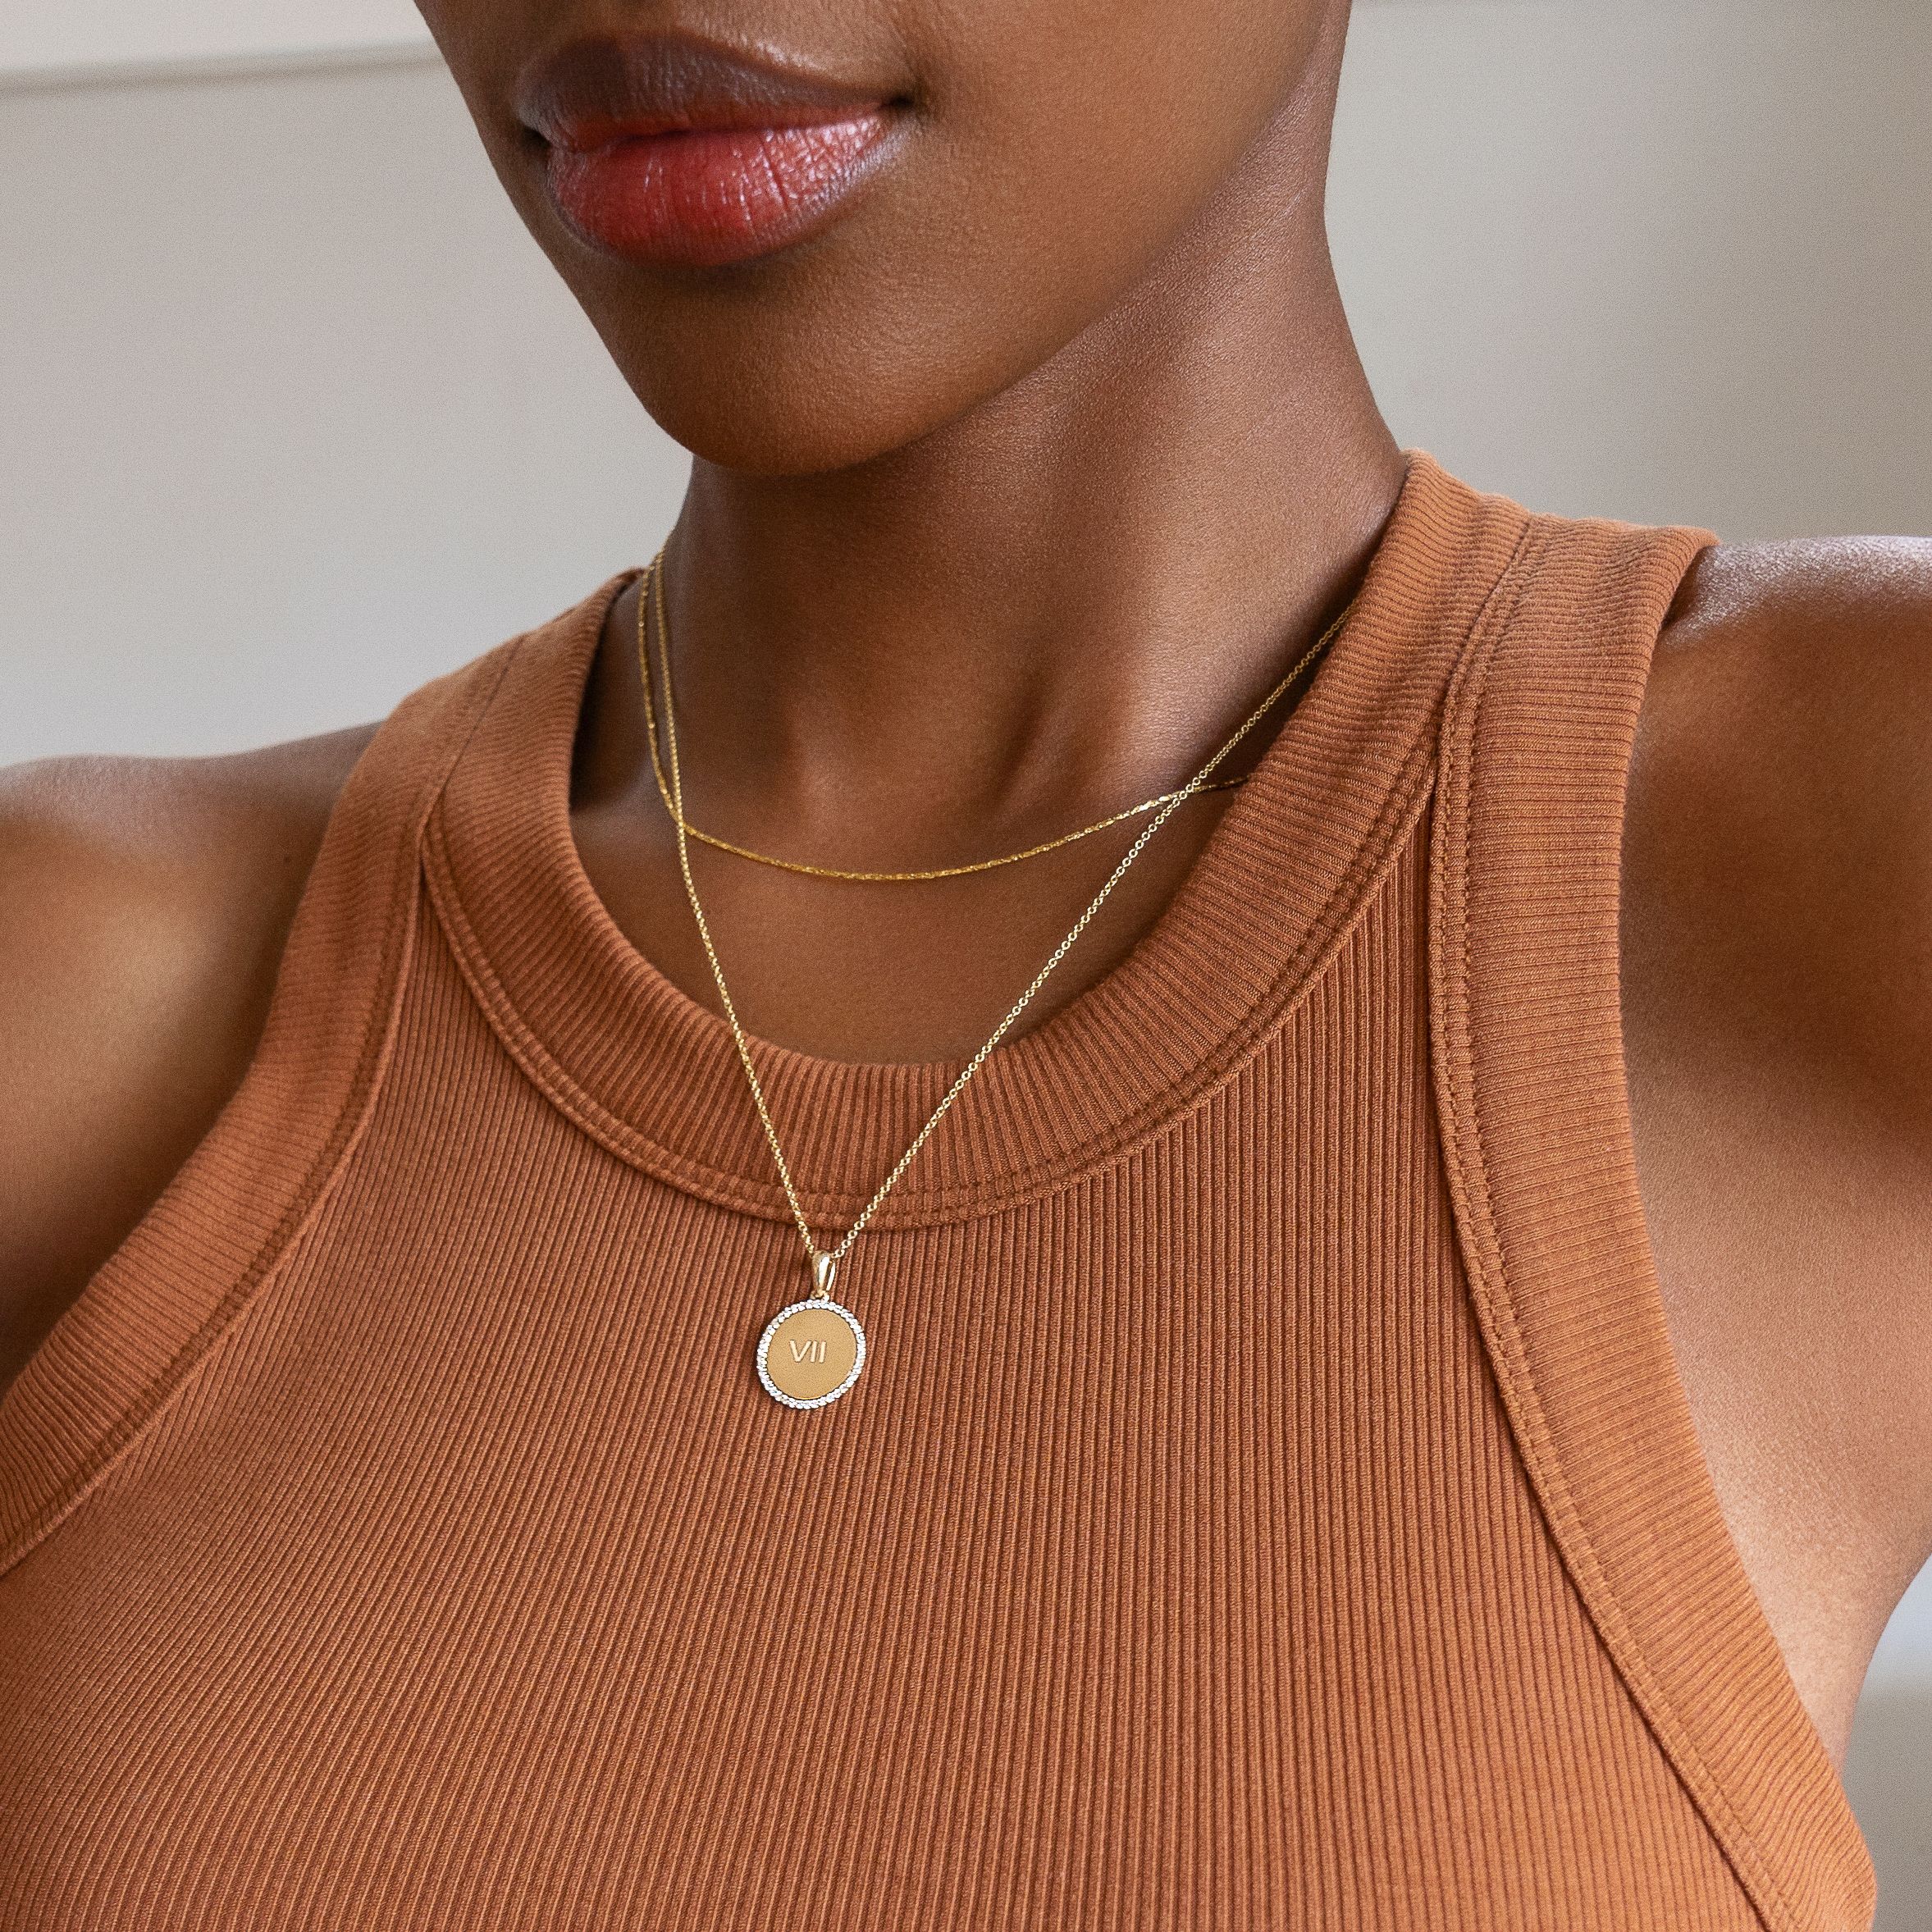 Necklace Length Guide – fyb jewelry